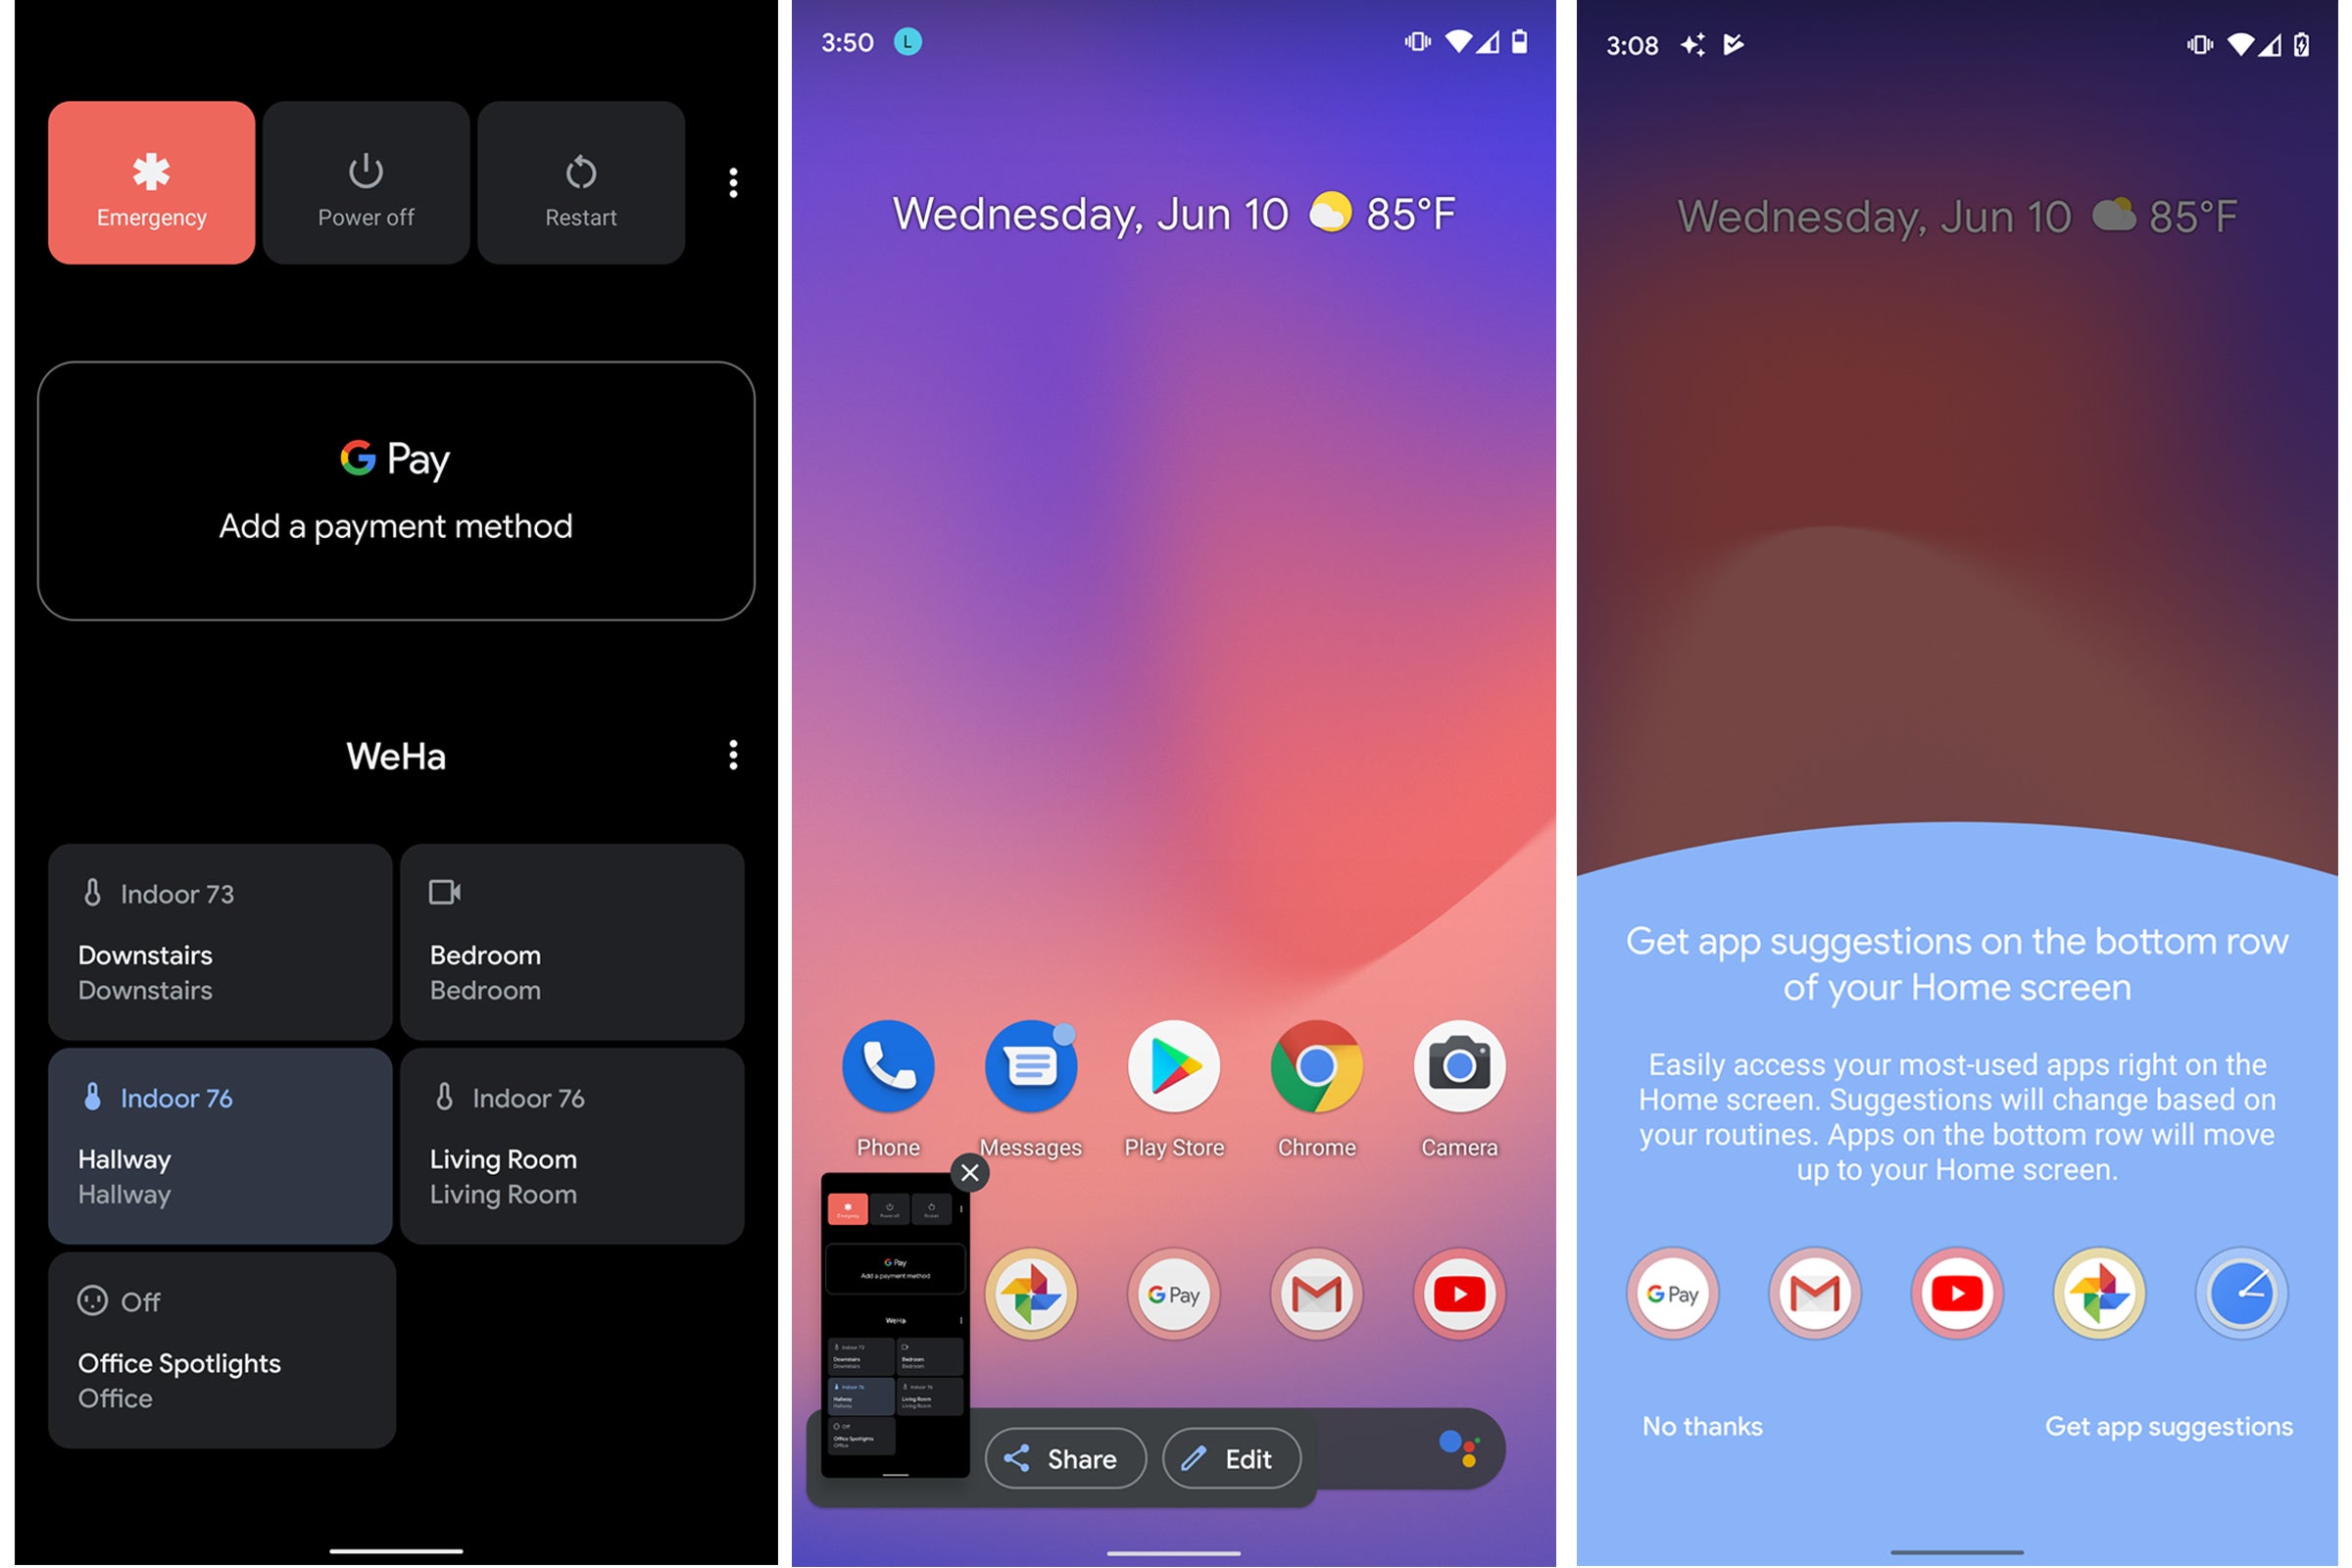 Google quietly releases Android 11 public beta with few notable